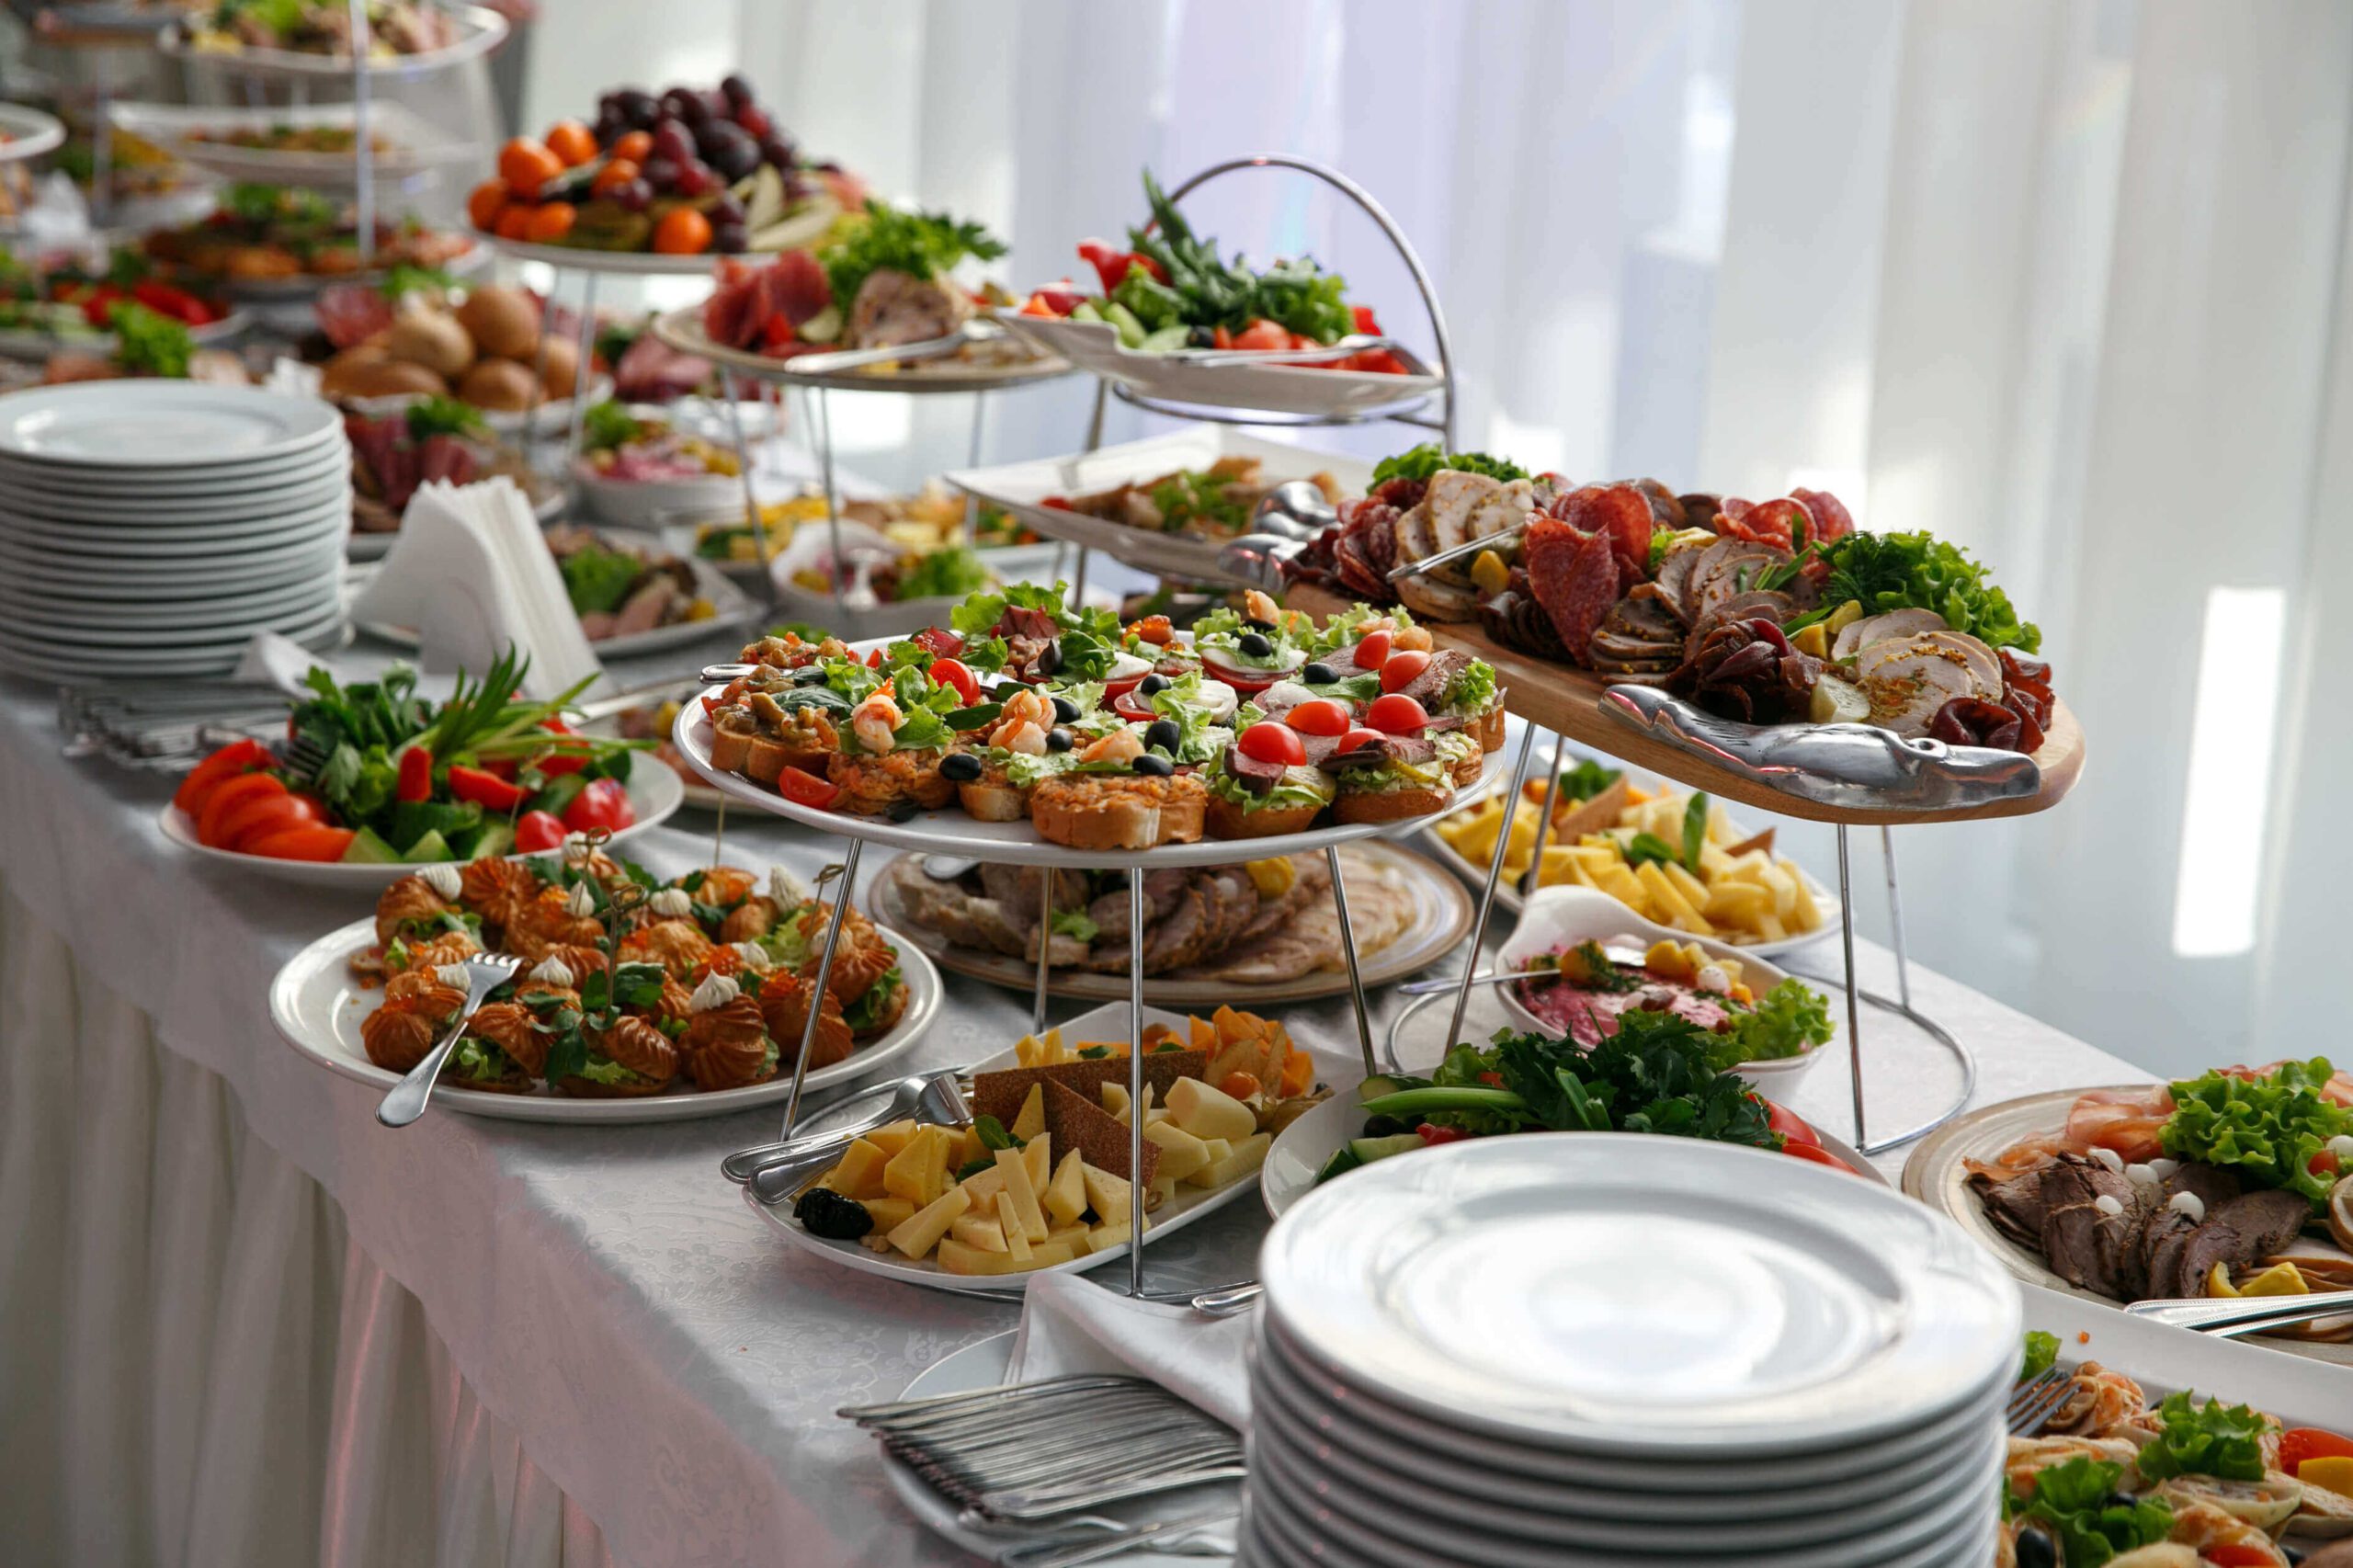 catering-service-restaurant-table-with-snacks-food-event (1) (1) (1)